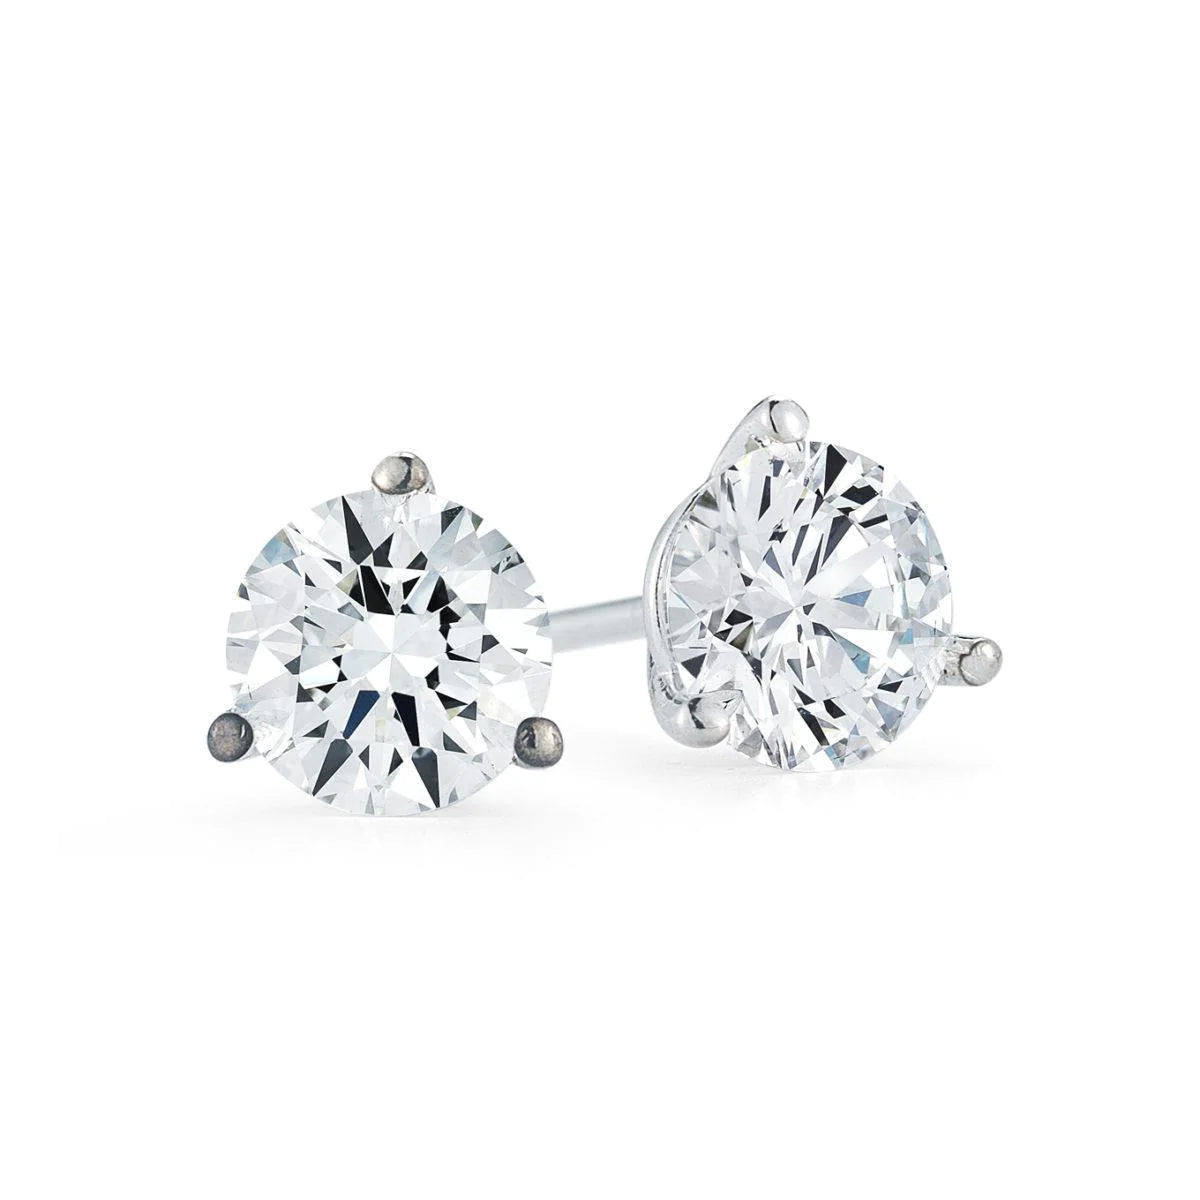 Round Cut Solitaire Real Diamond Stud Earring White Gold 14K 1.10 Carats